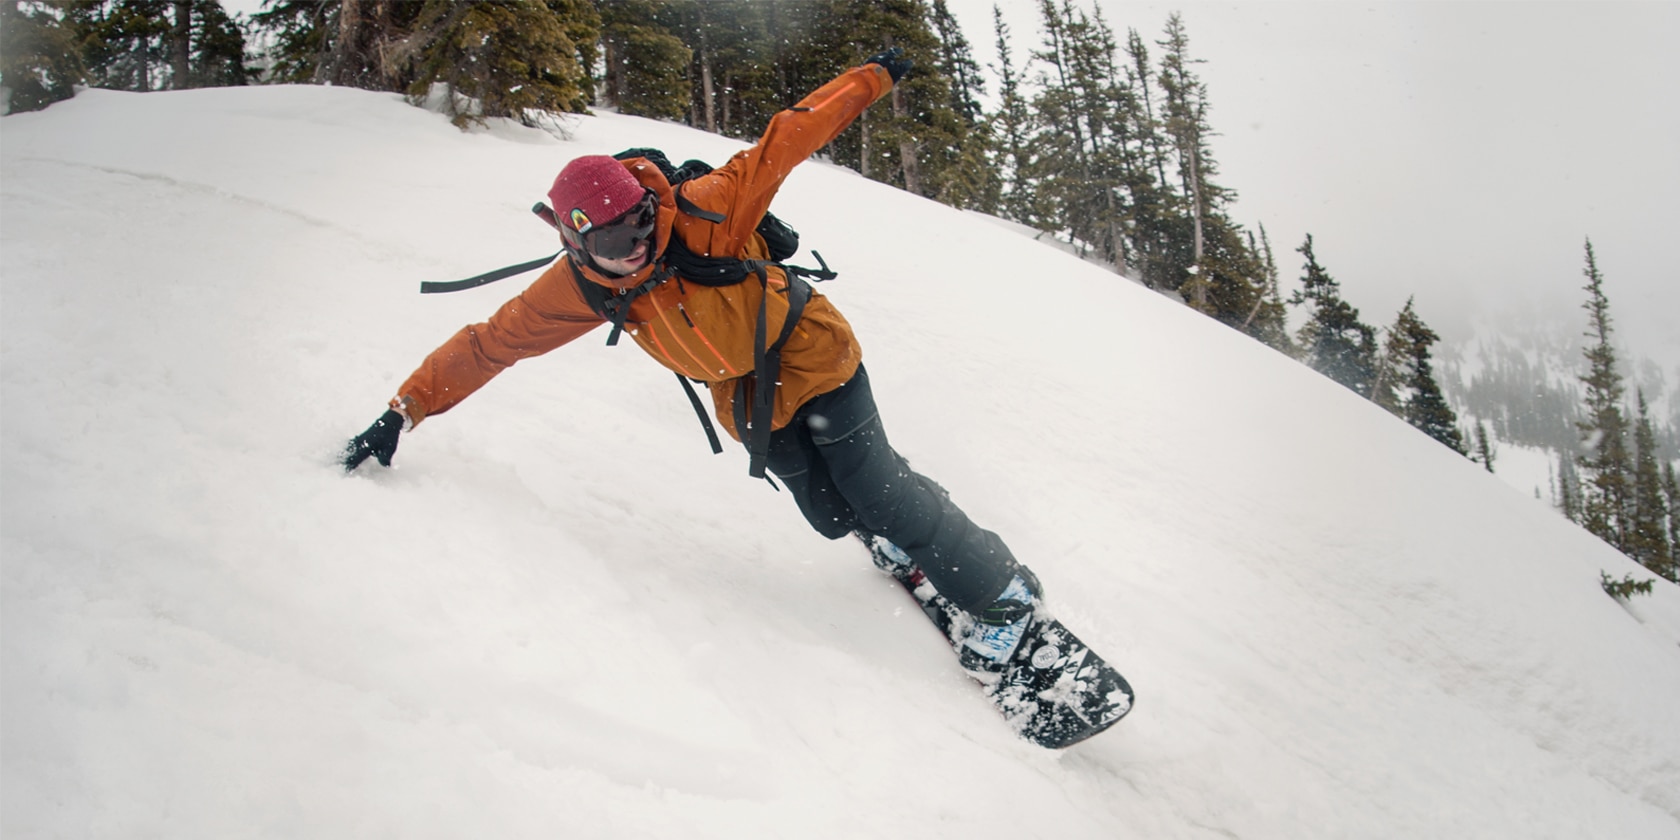 snowboarding man wildly leans with his arm extended touching snow